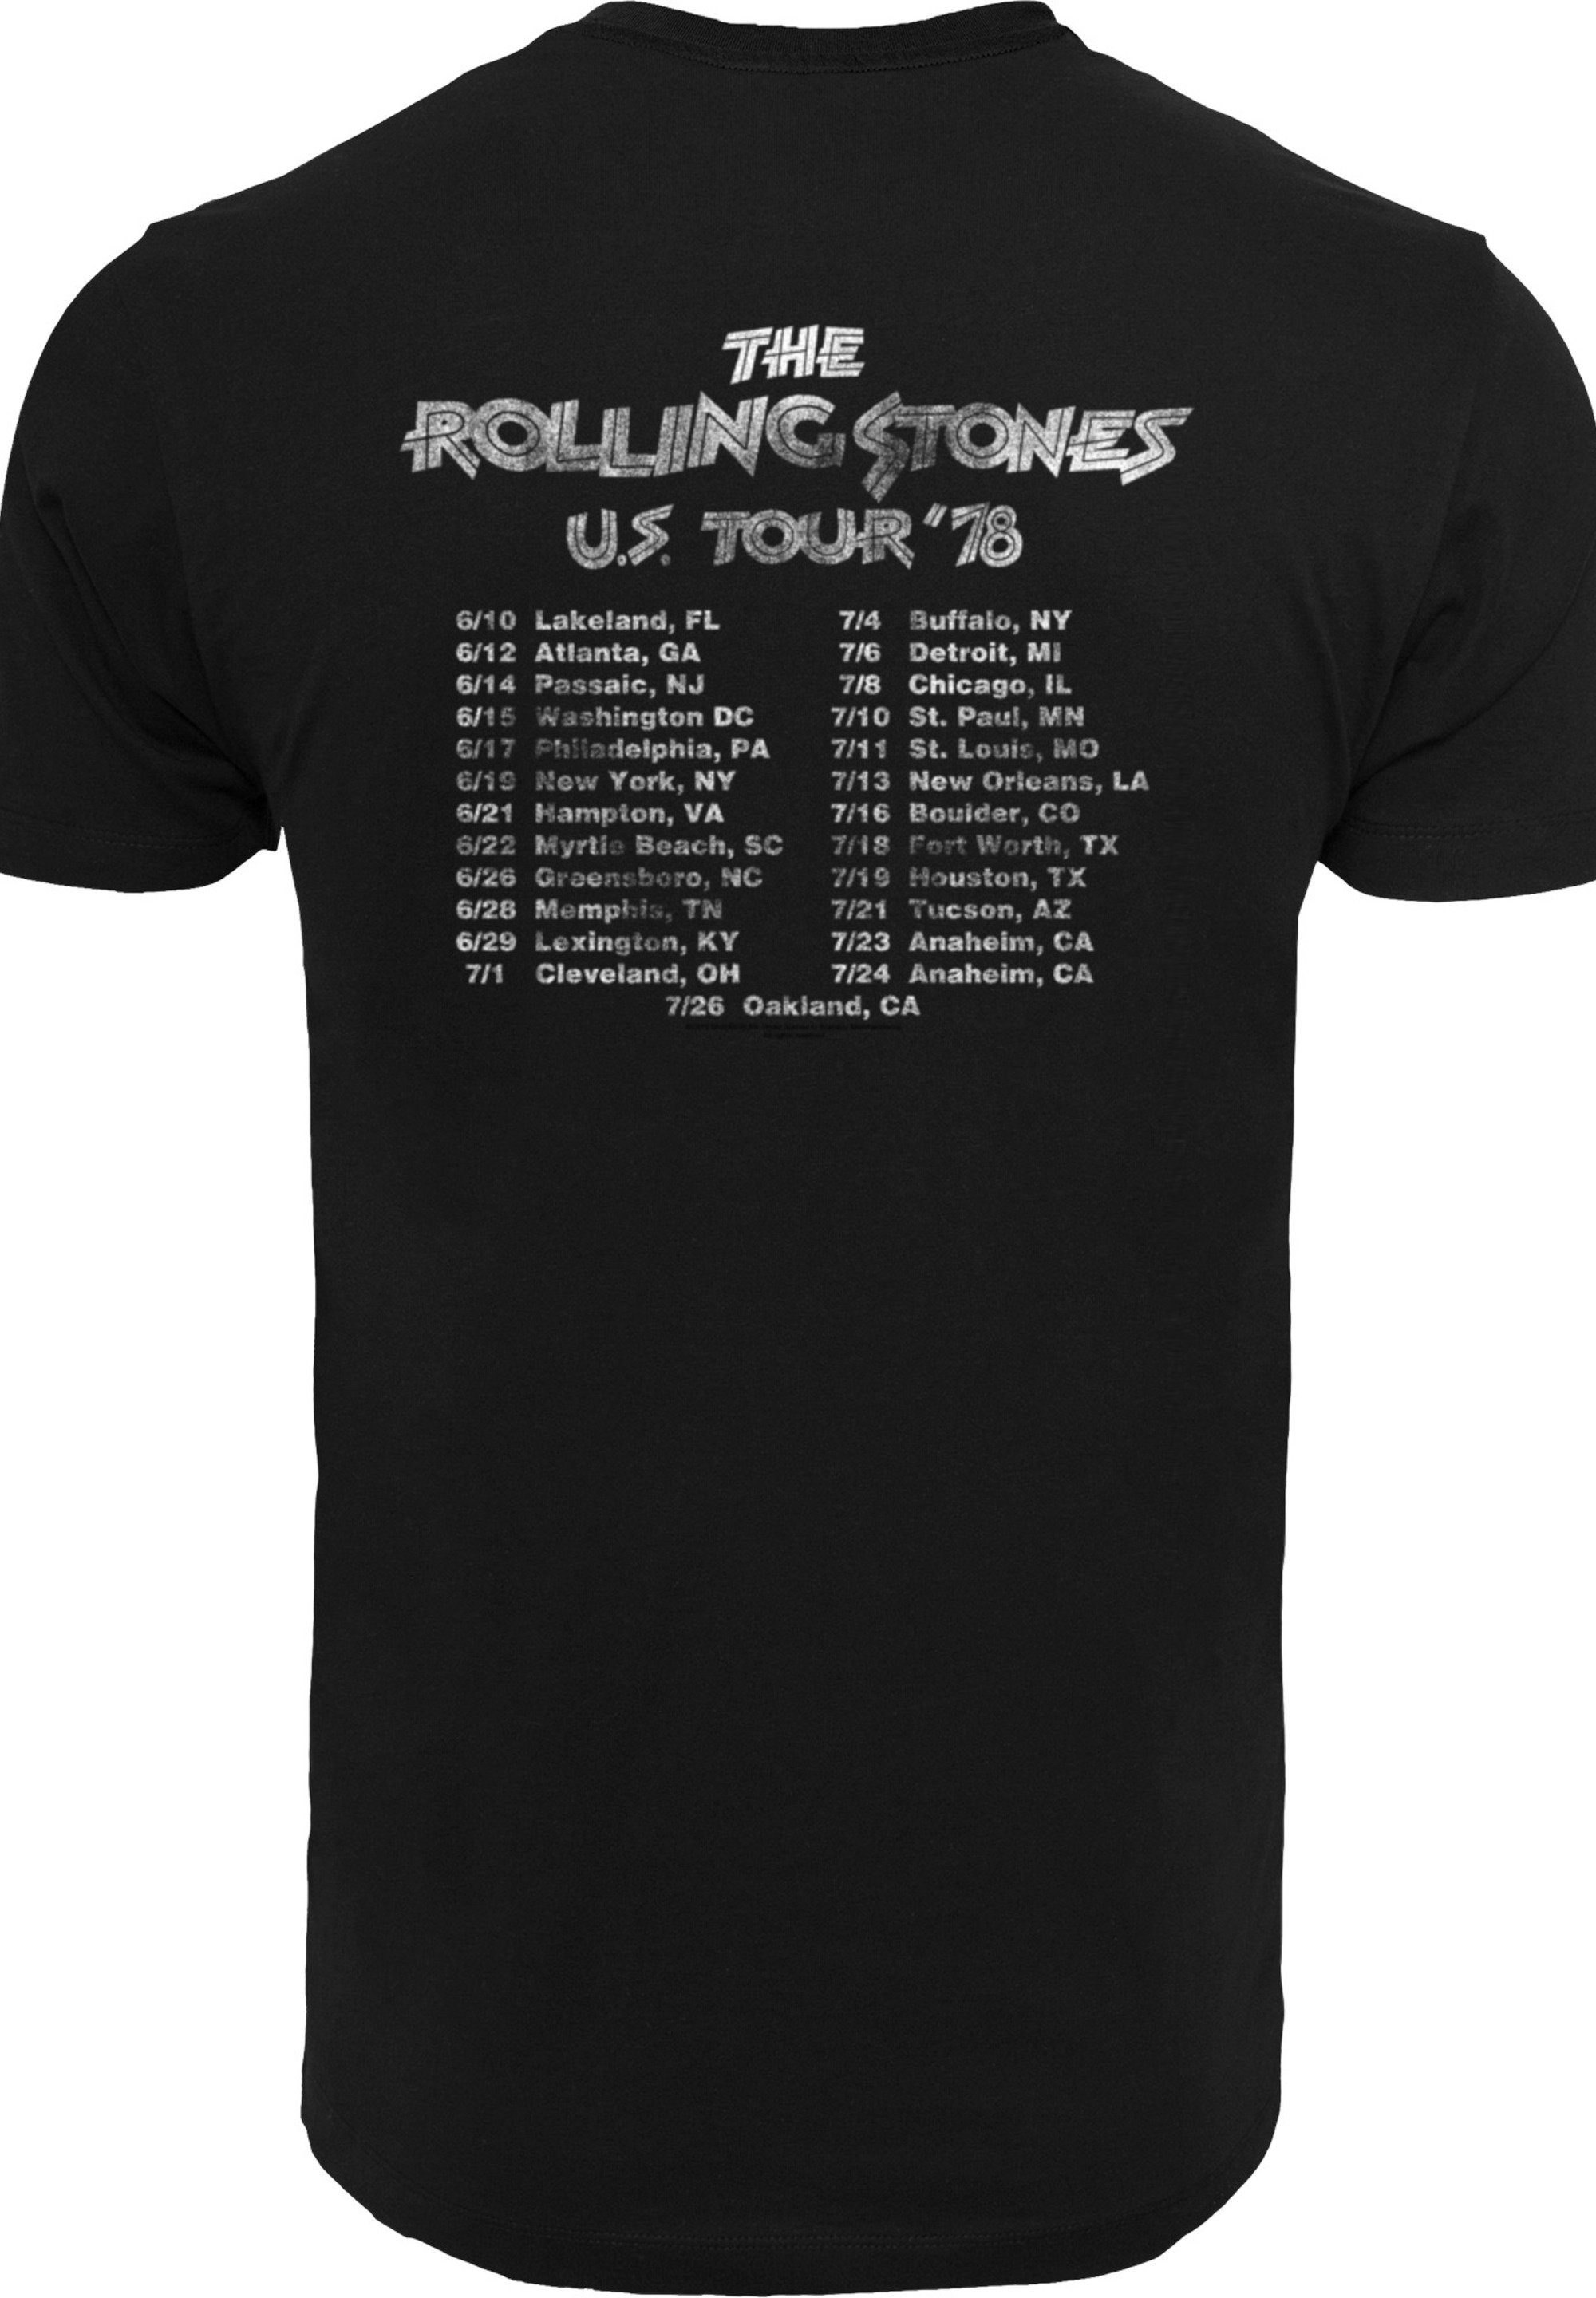 The Rock Print US Tour F4NT4STIC T-Shirt Band Stones Rolling '78 Front